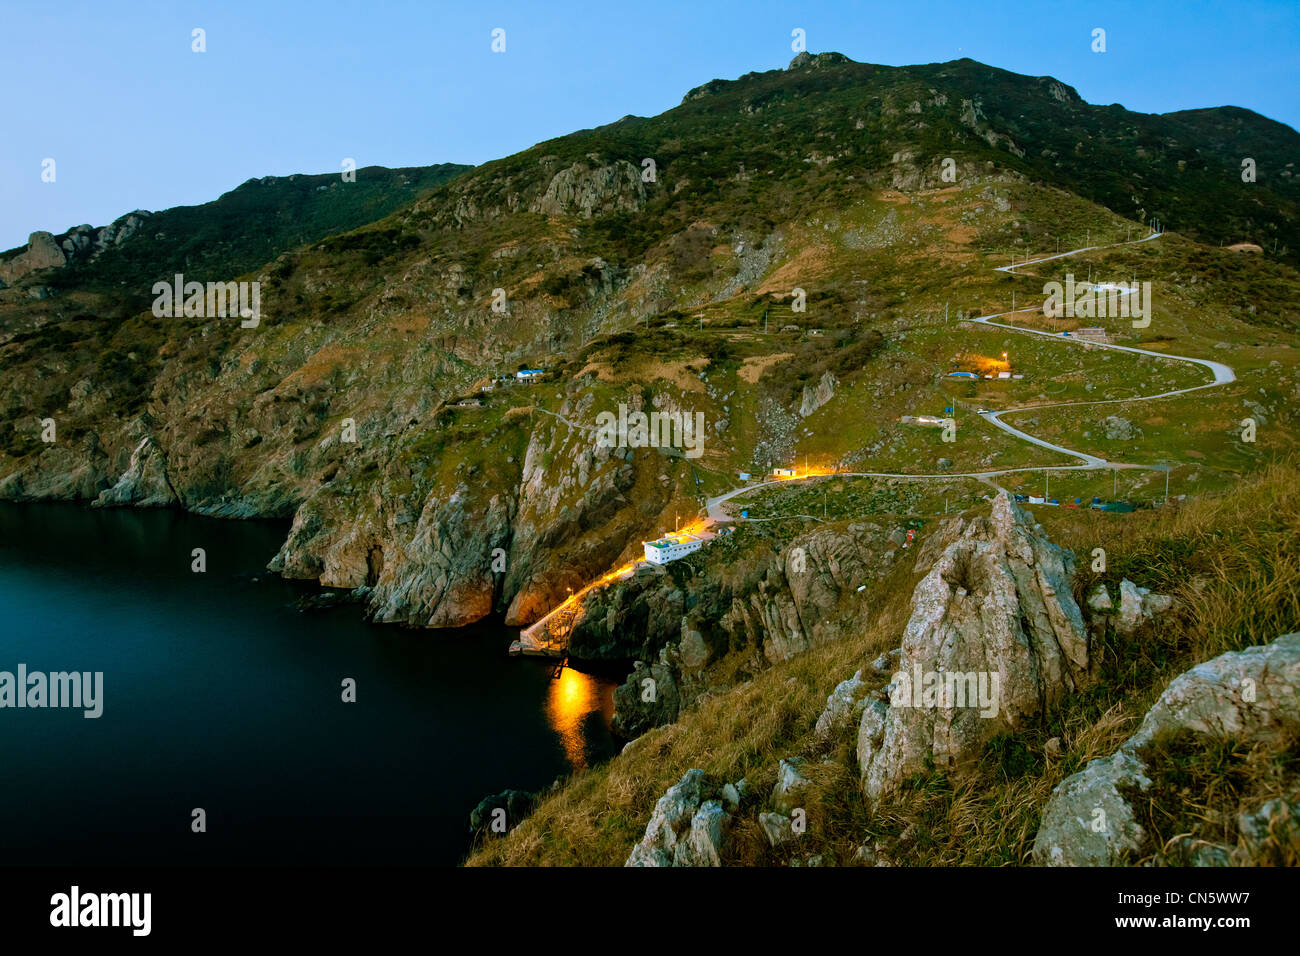 South Korea, South Jeolla Province, Gageodo, night view of the western tip of the Gageo Island, hotel and small winding road Stock Photo